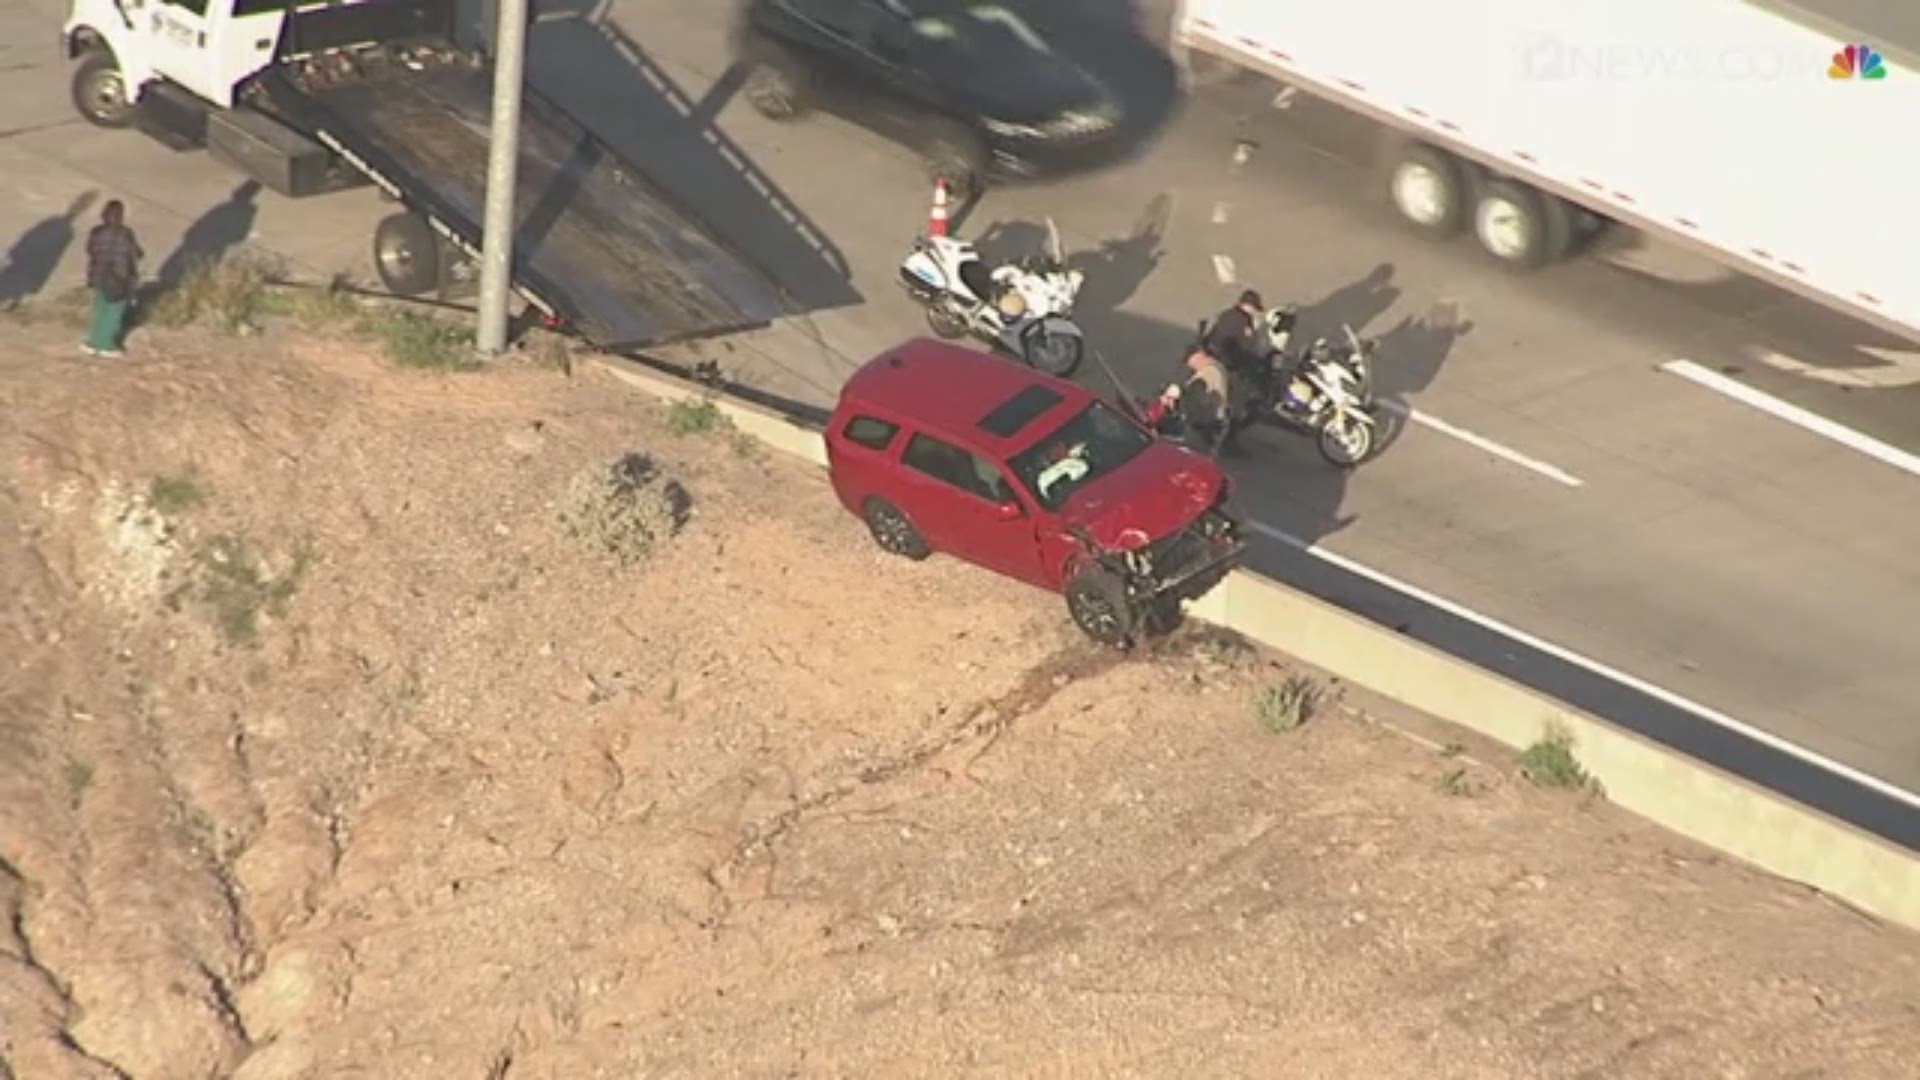 Sky 12 captured footage of the car sitting on top of the concrete barrier.